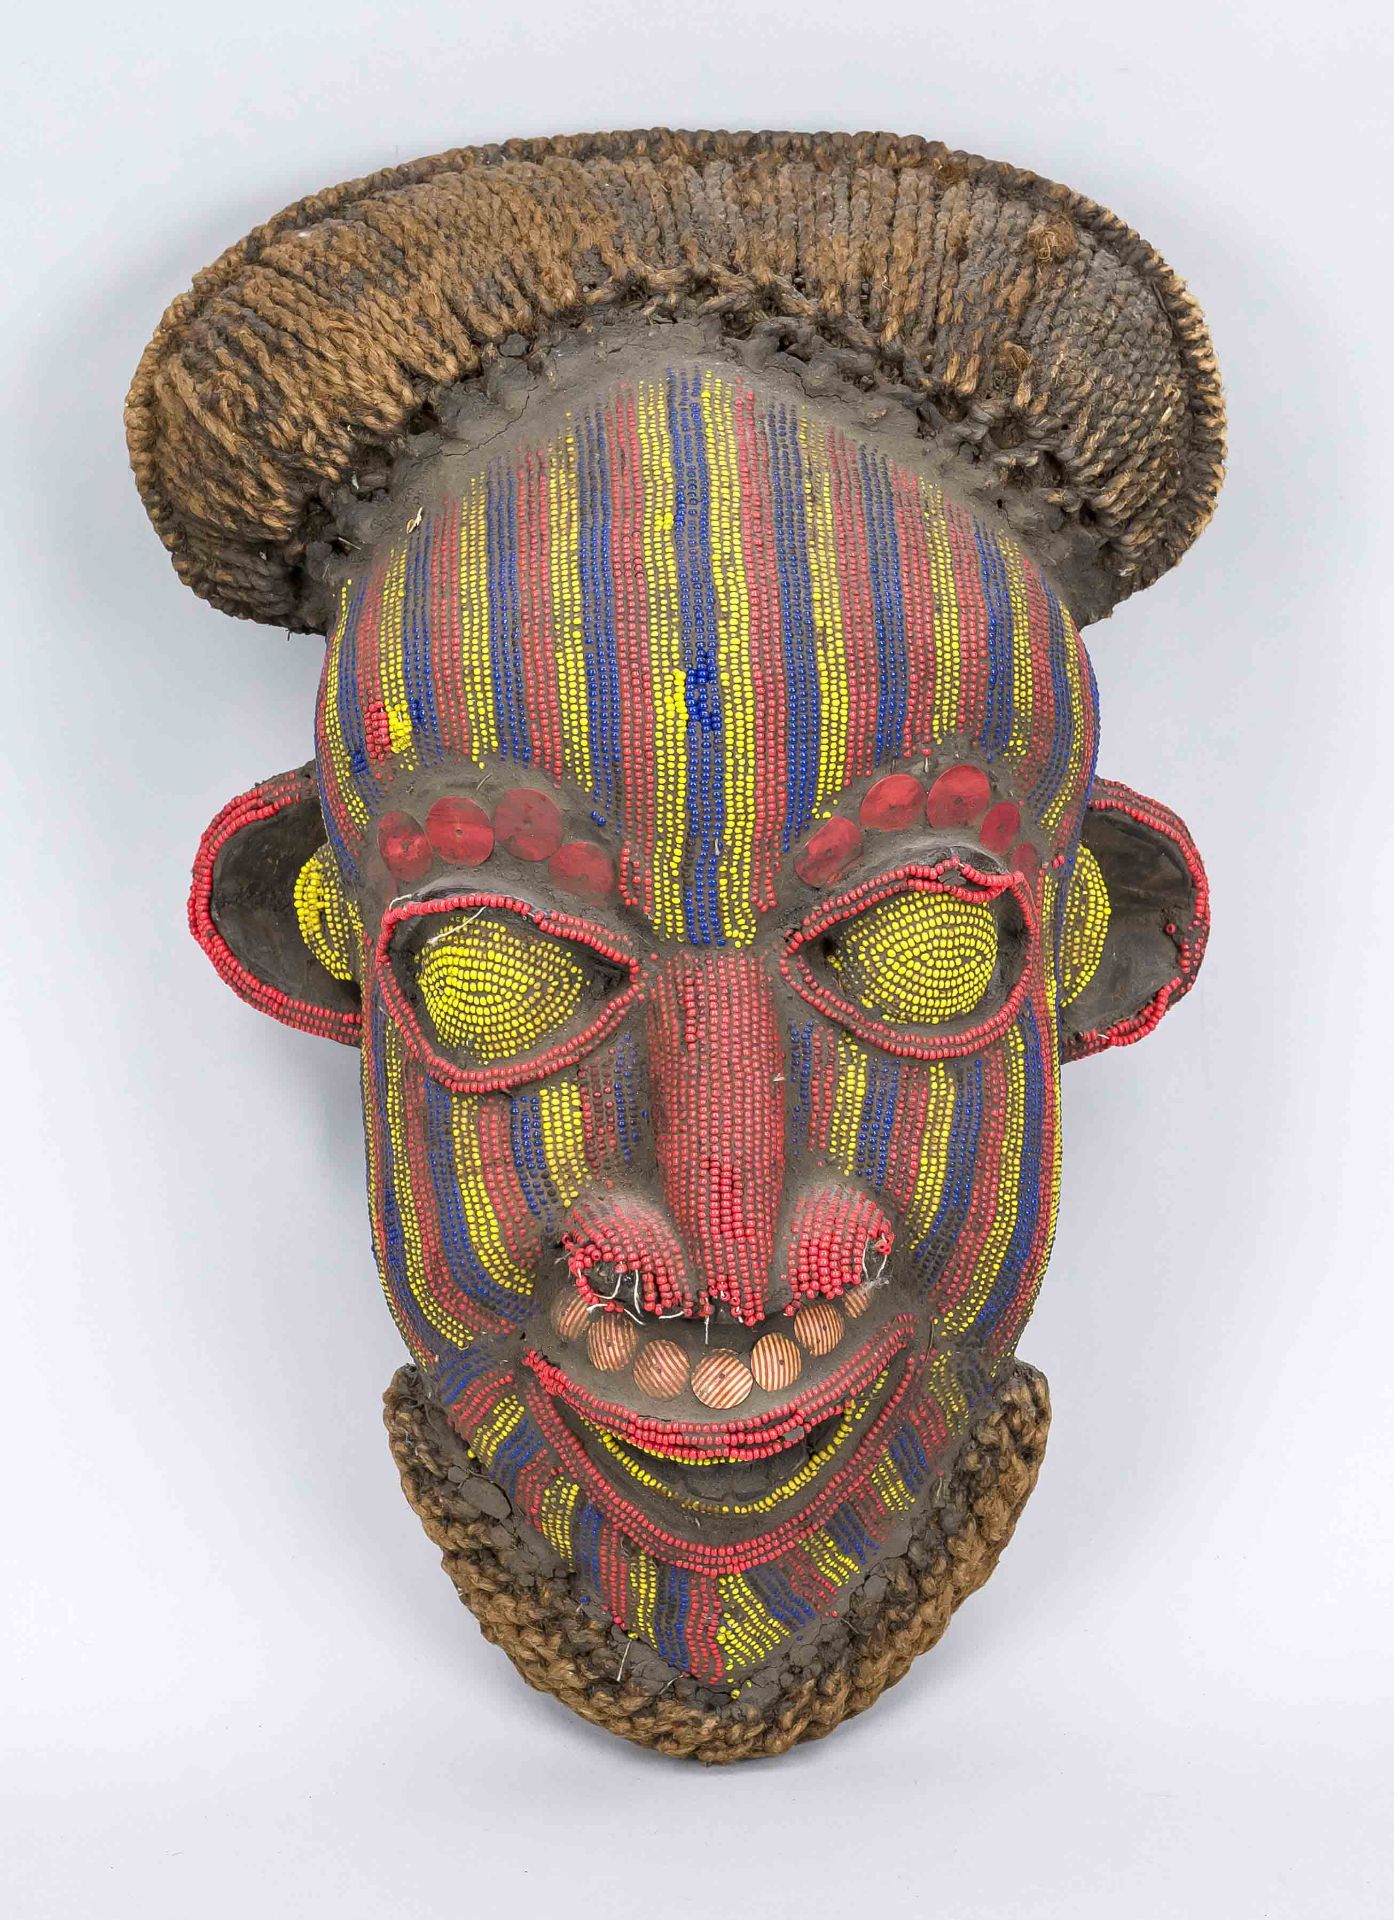 Mask, probably West African, probably 20th century, wood with textile and trimming with colorful